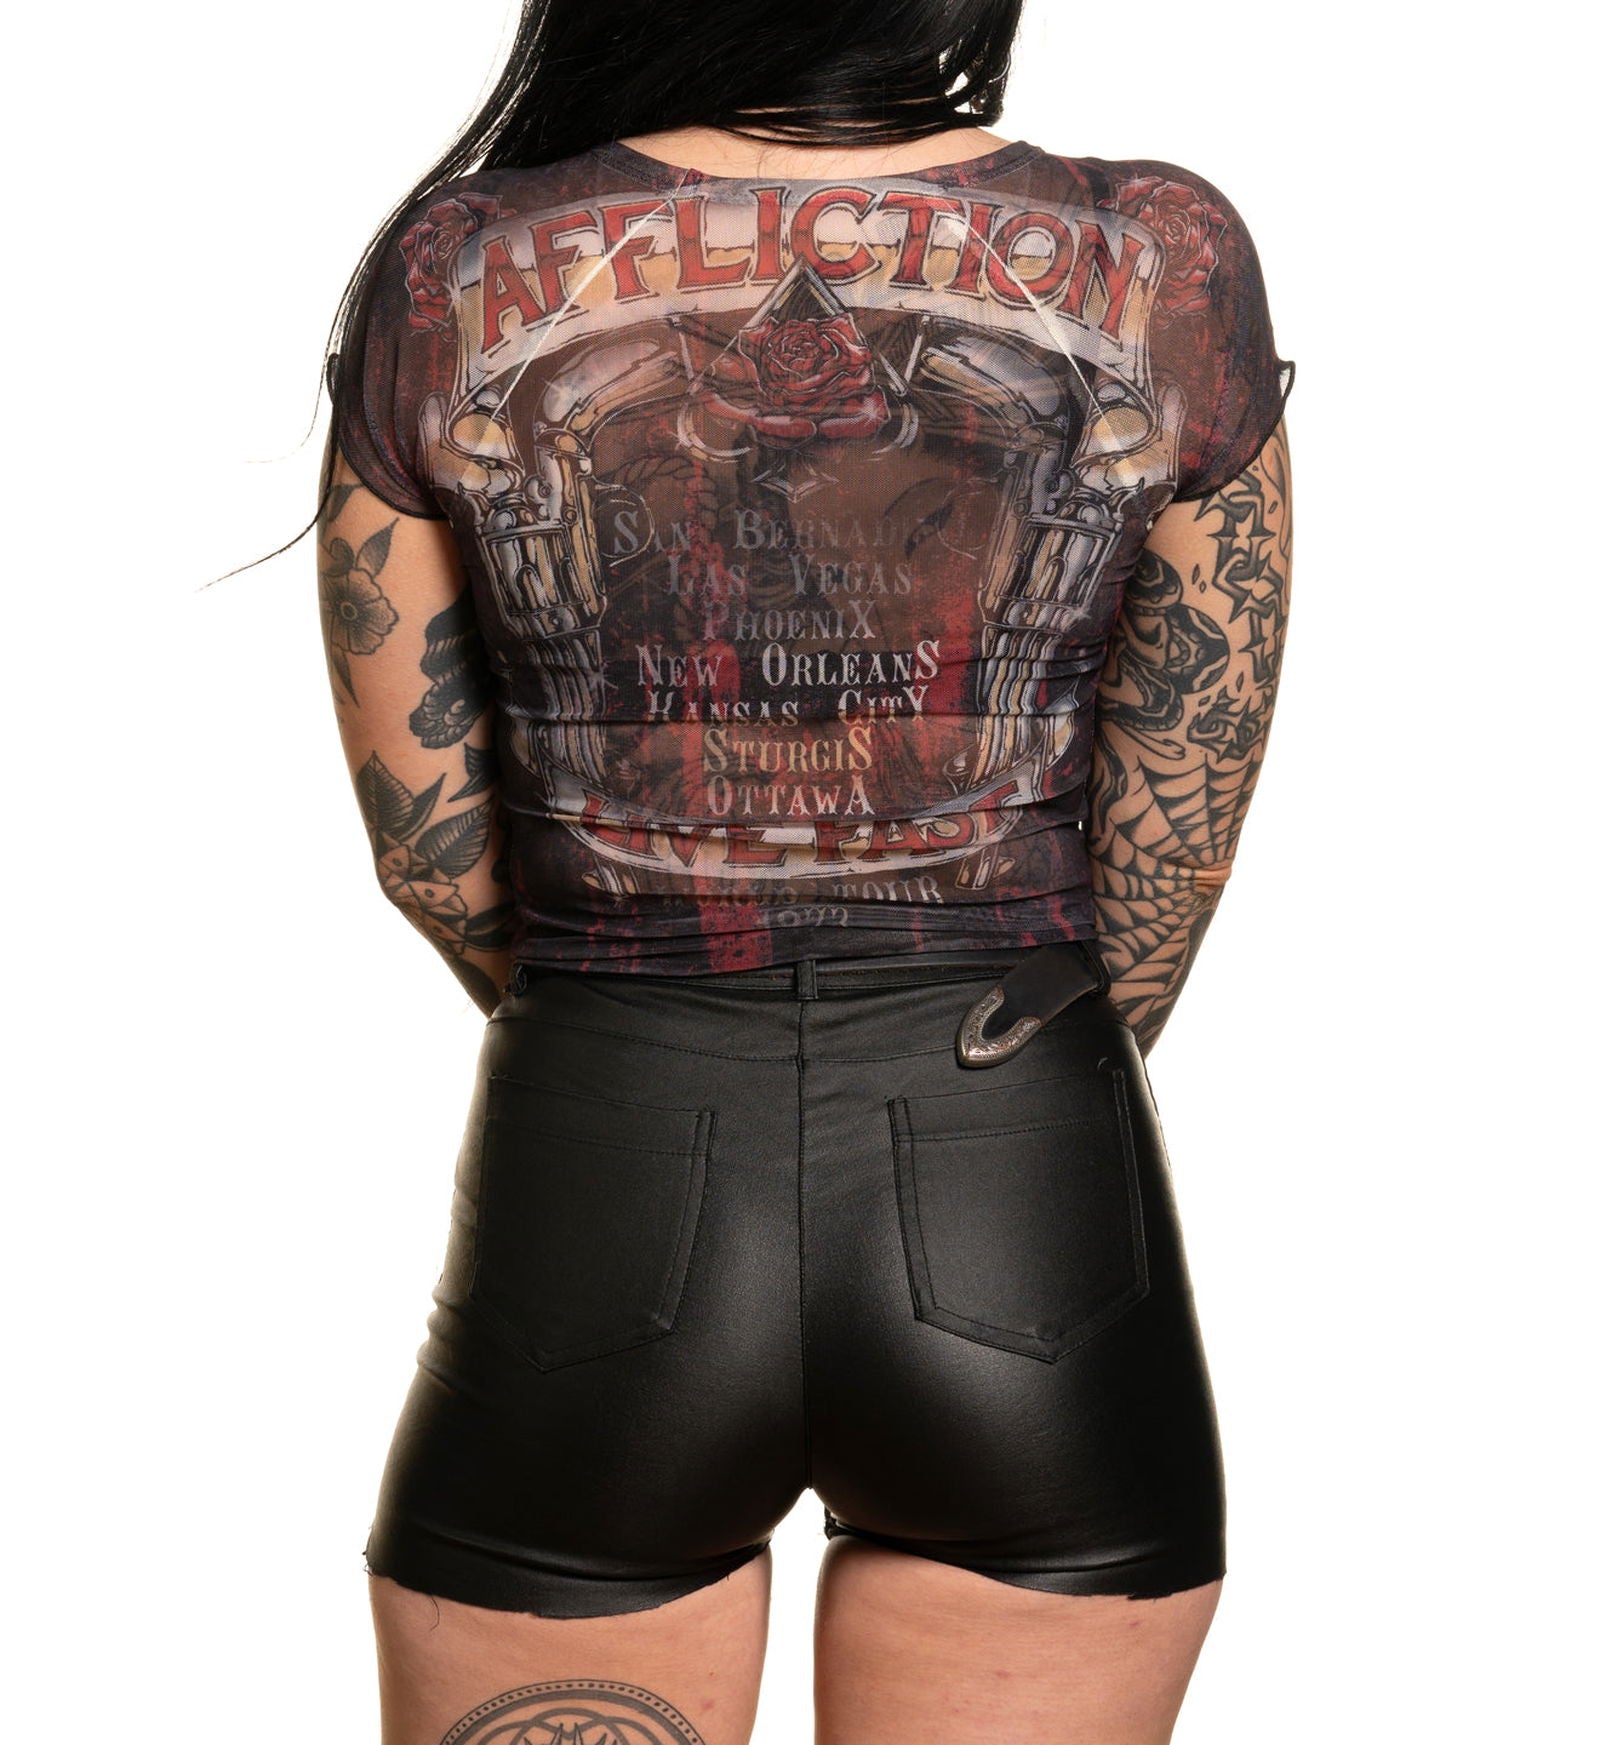 Hollow Point - Affliction Clothing